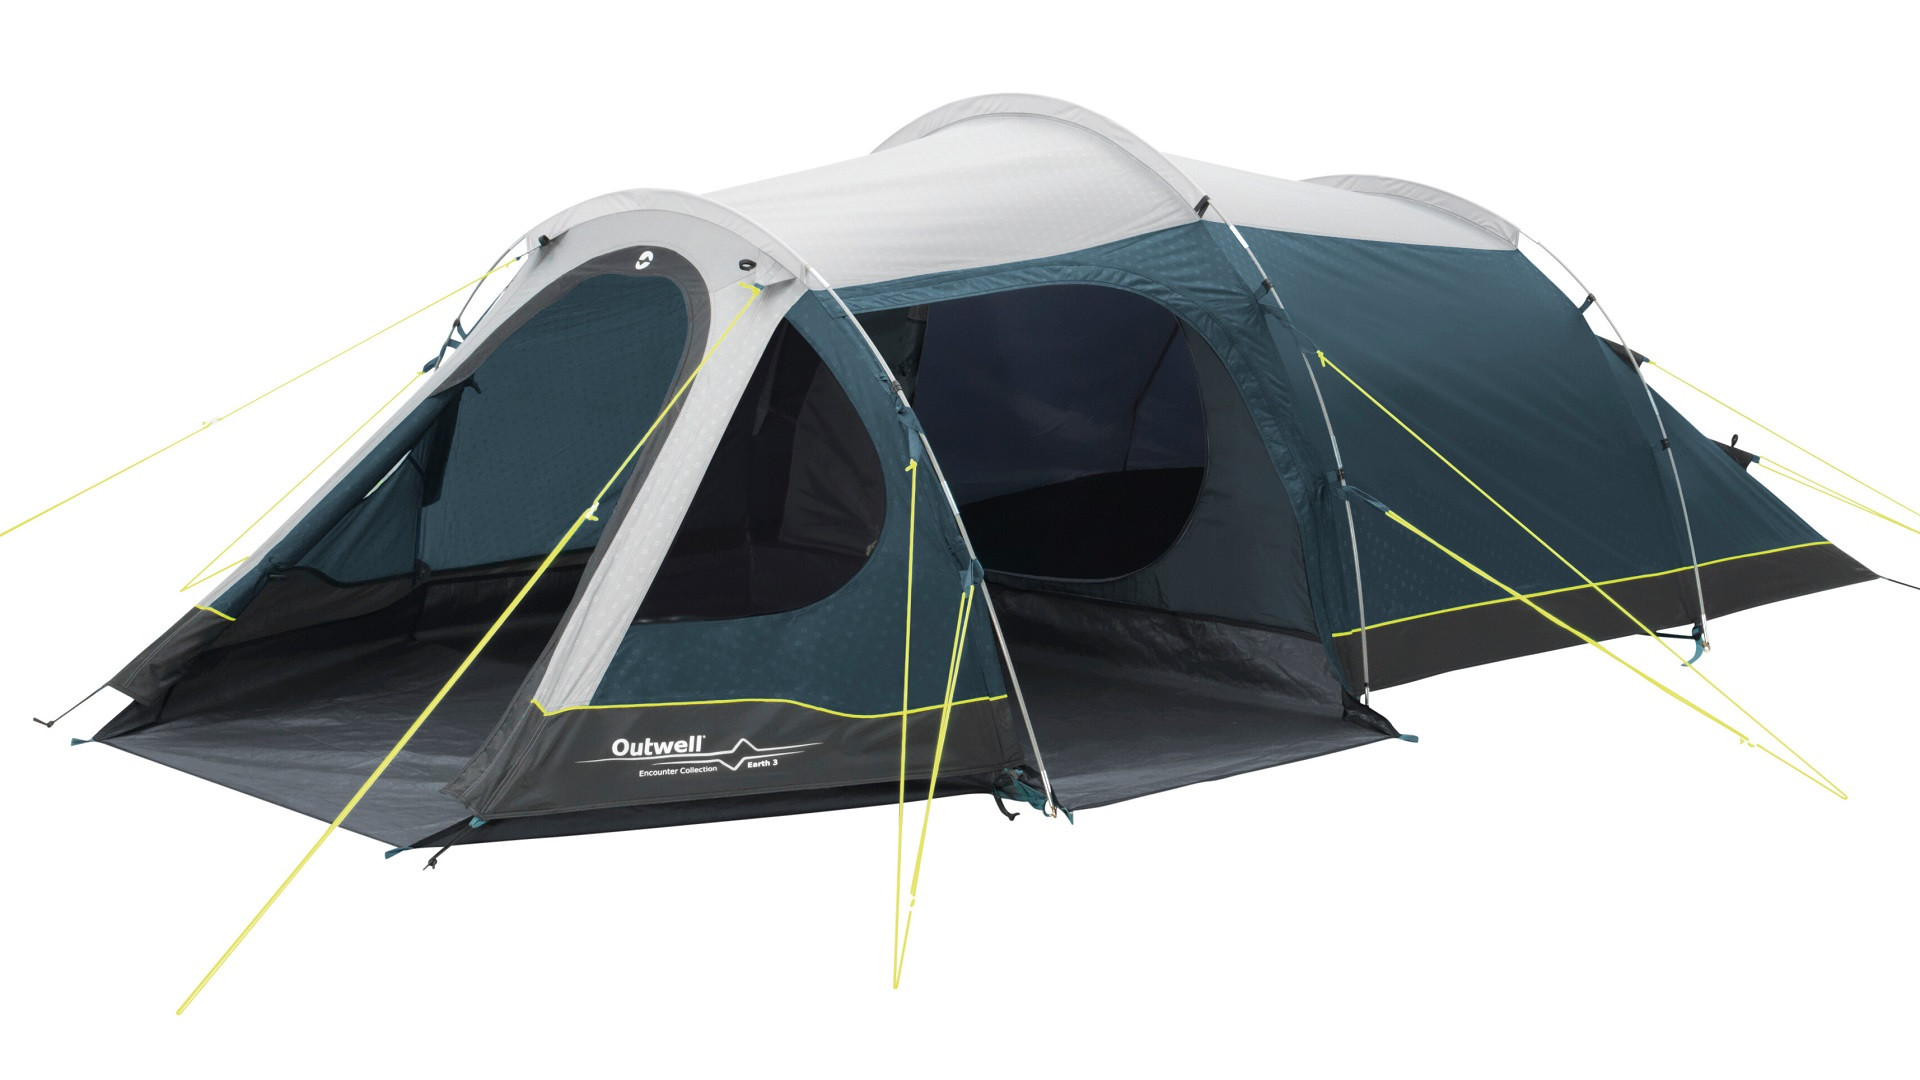 Resistent Nationale volkstelling belofte Outwell Tent Earth 3 | World of Camping